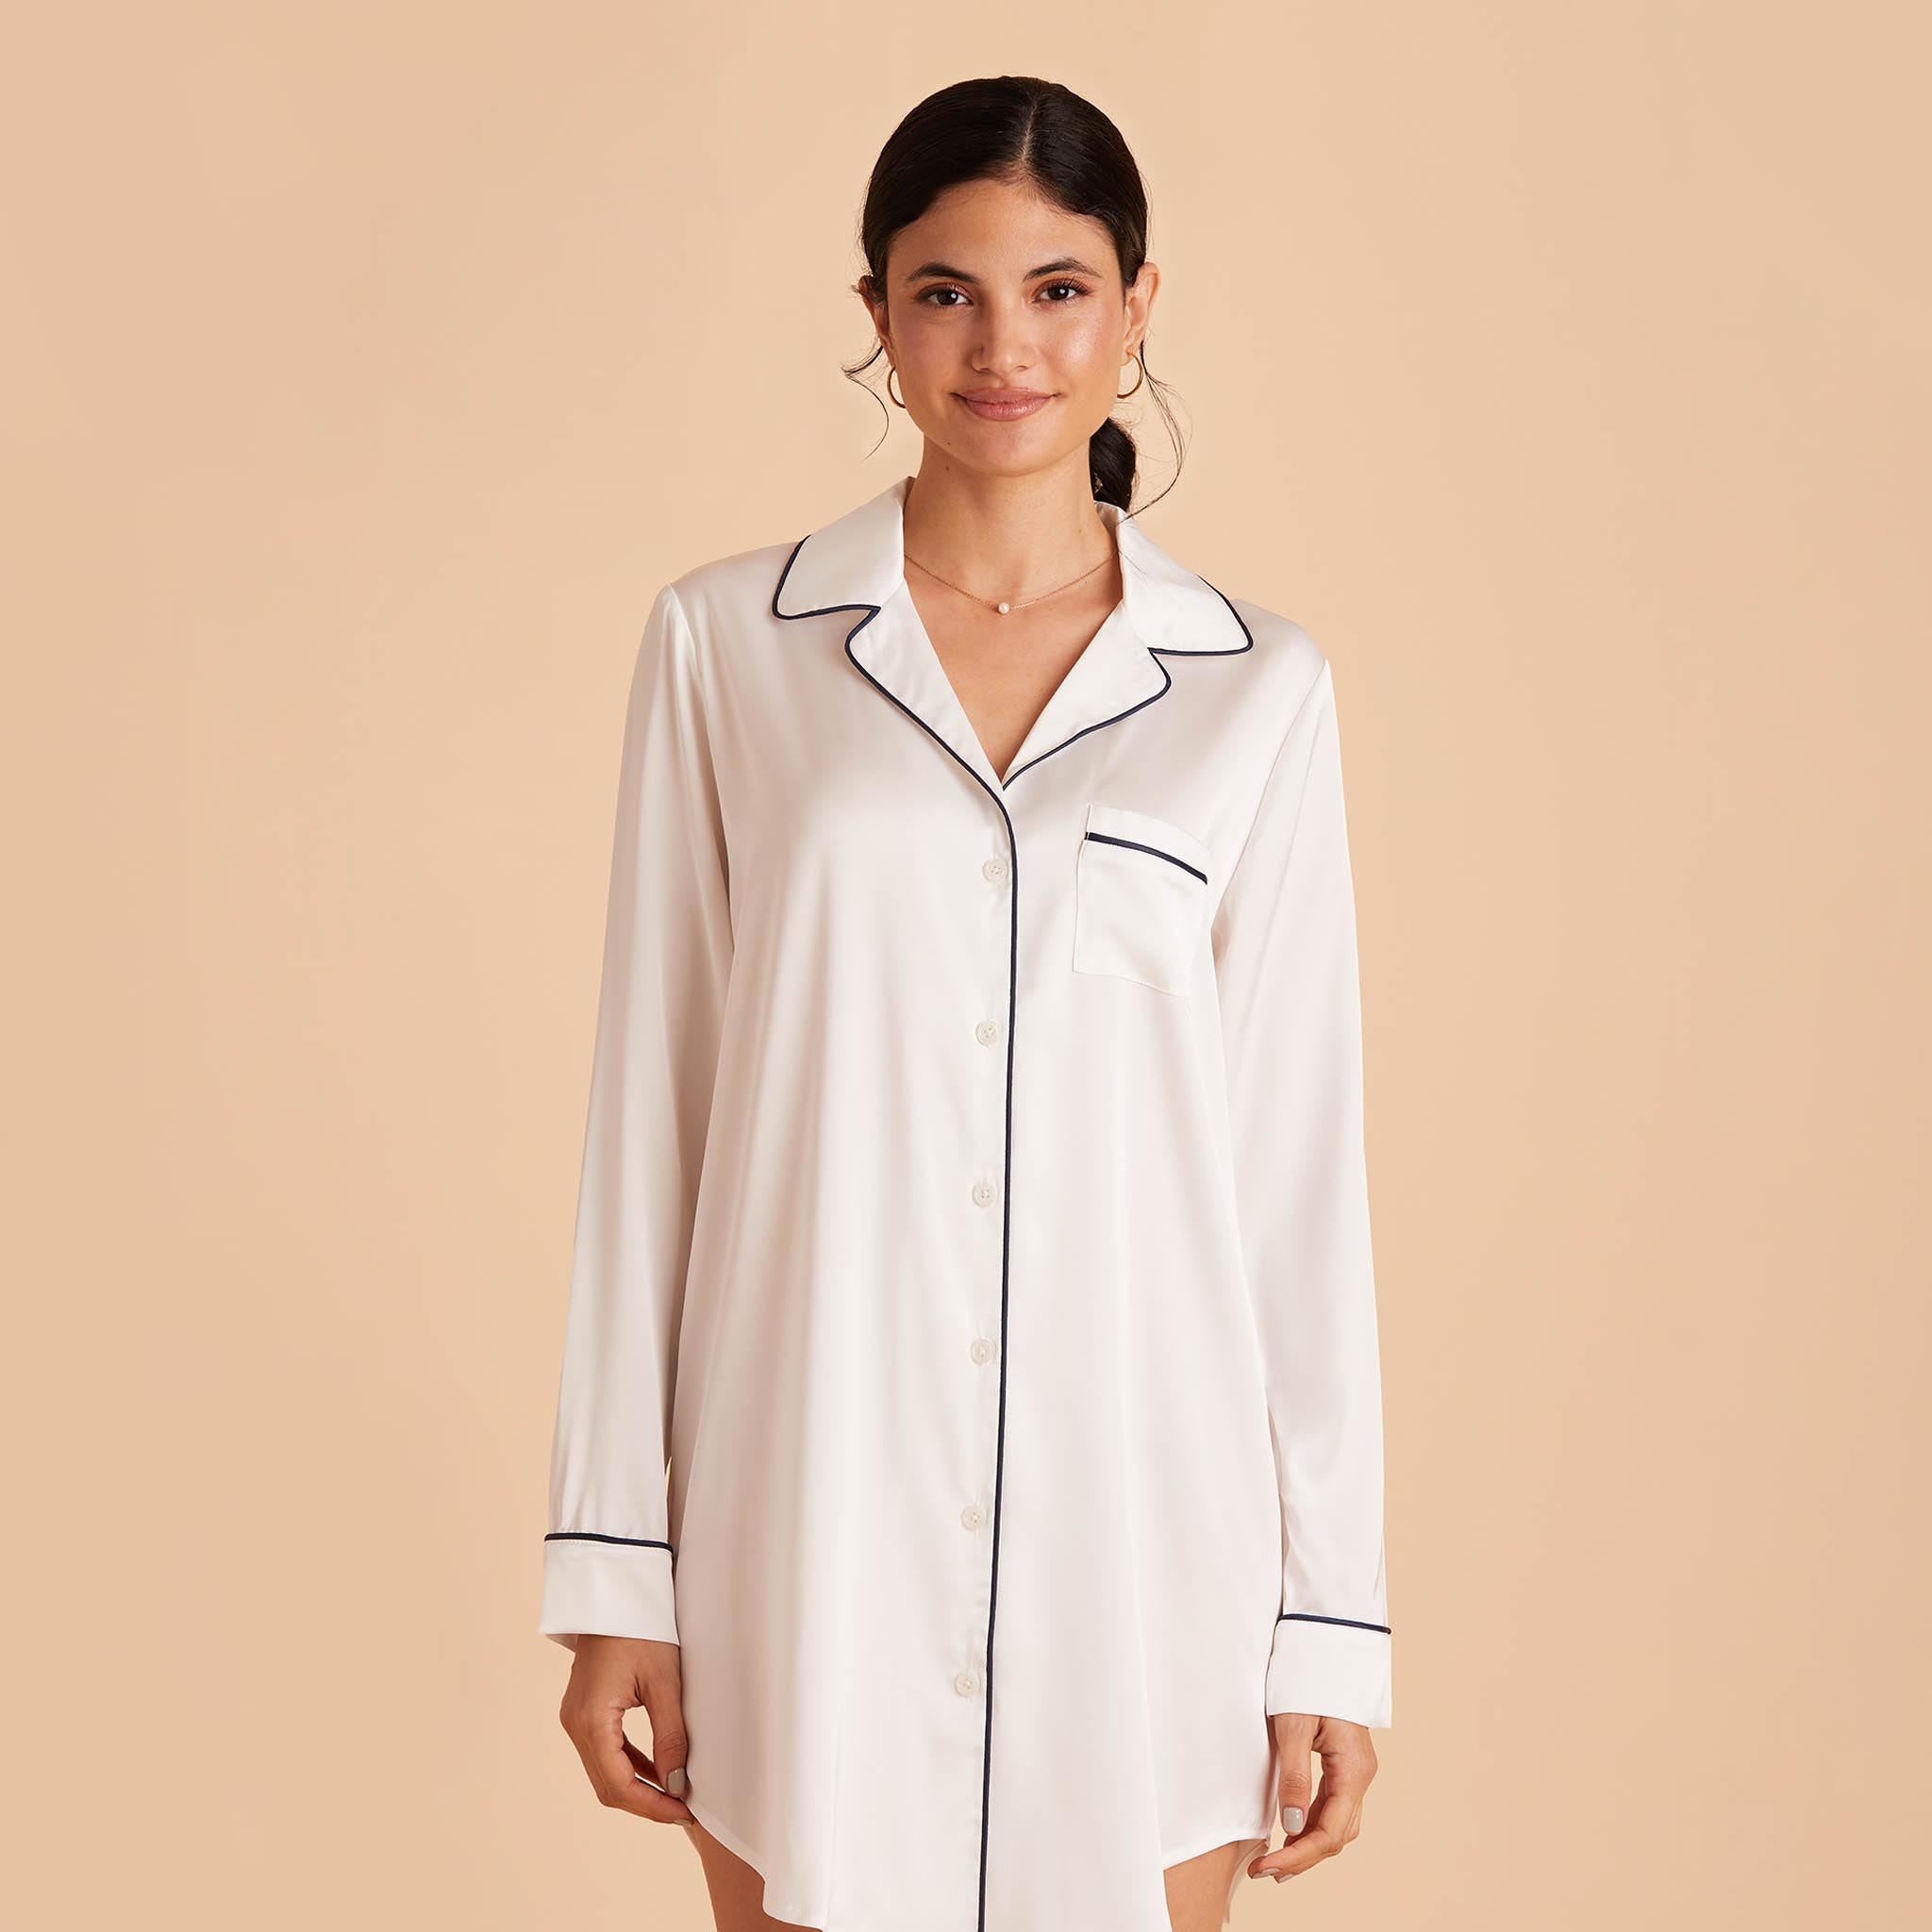 Satin Sleepshirt in ivory by Birdy Grey, front view